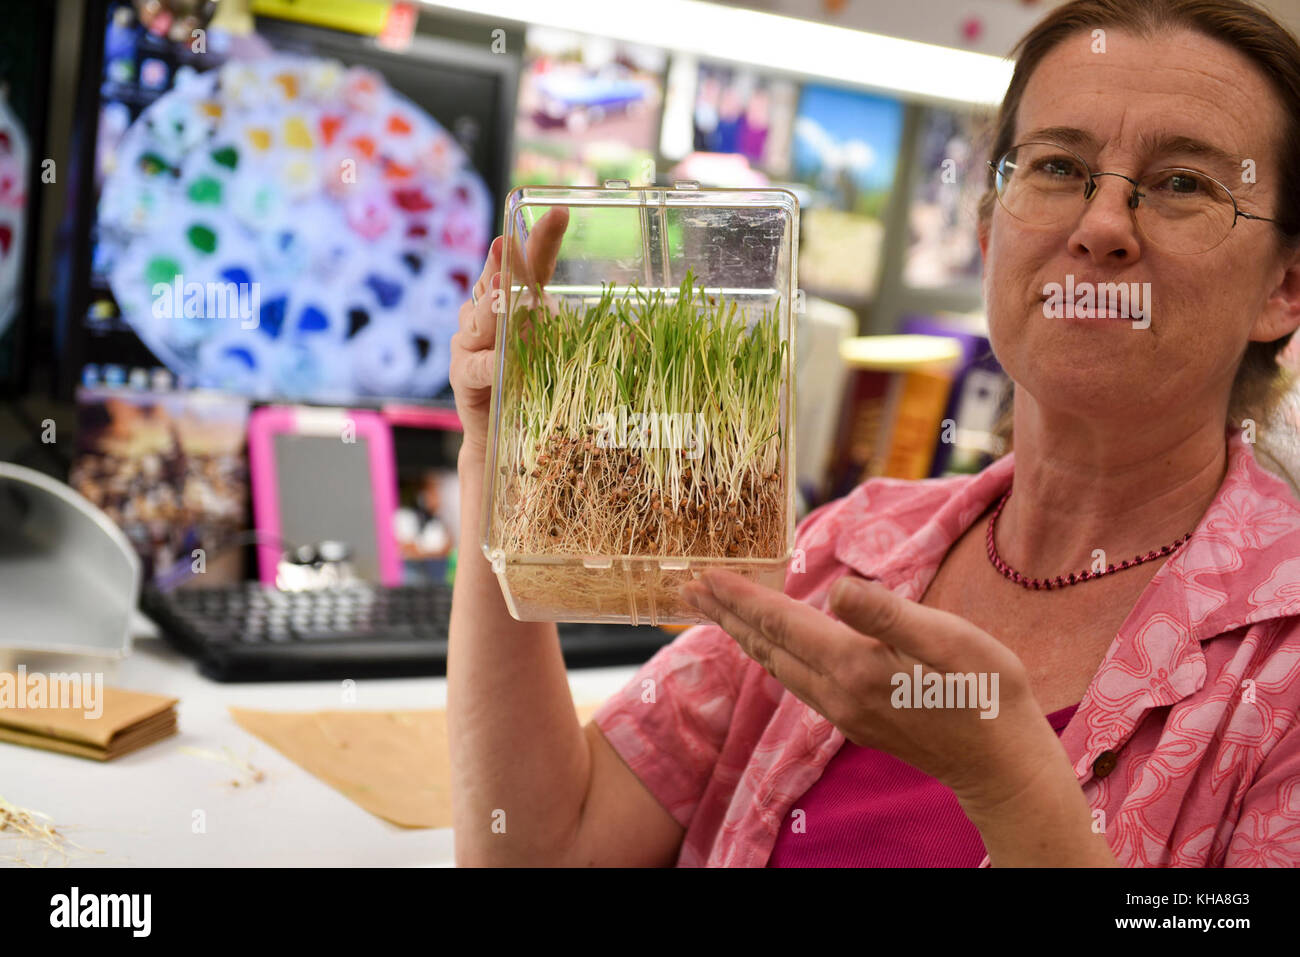 U.S. Department of Agriculture (USDA) Agricultural Research Service (ARS) Biological Science Lab Technician Samantha Leach tests Sorghum Seed Viability at the National Laboratory for Genetic Resources Preservation in ft. Collins, CO il 16 settembre 2016. USDA foto di Neil Palmer. Foto Stock